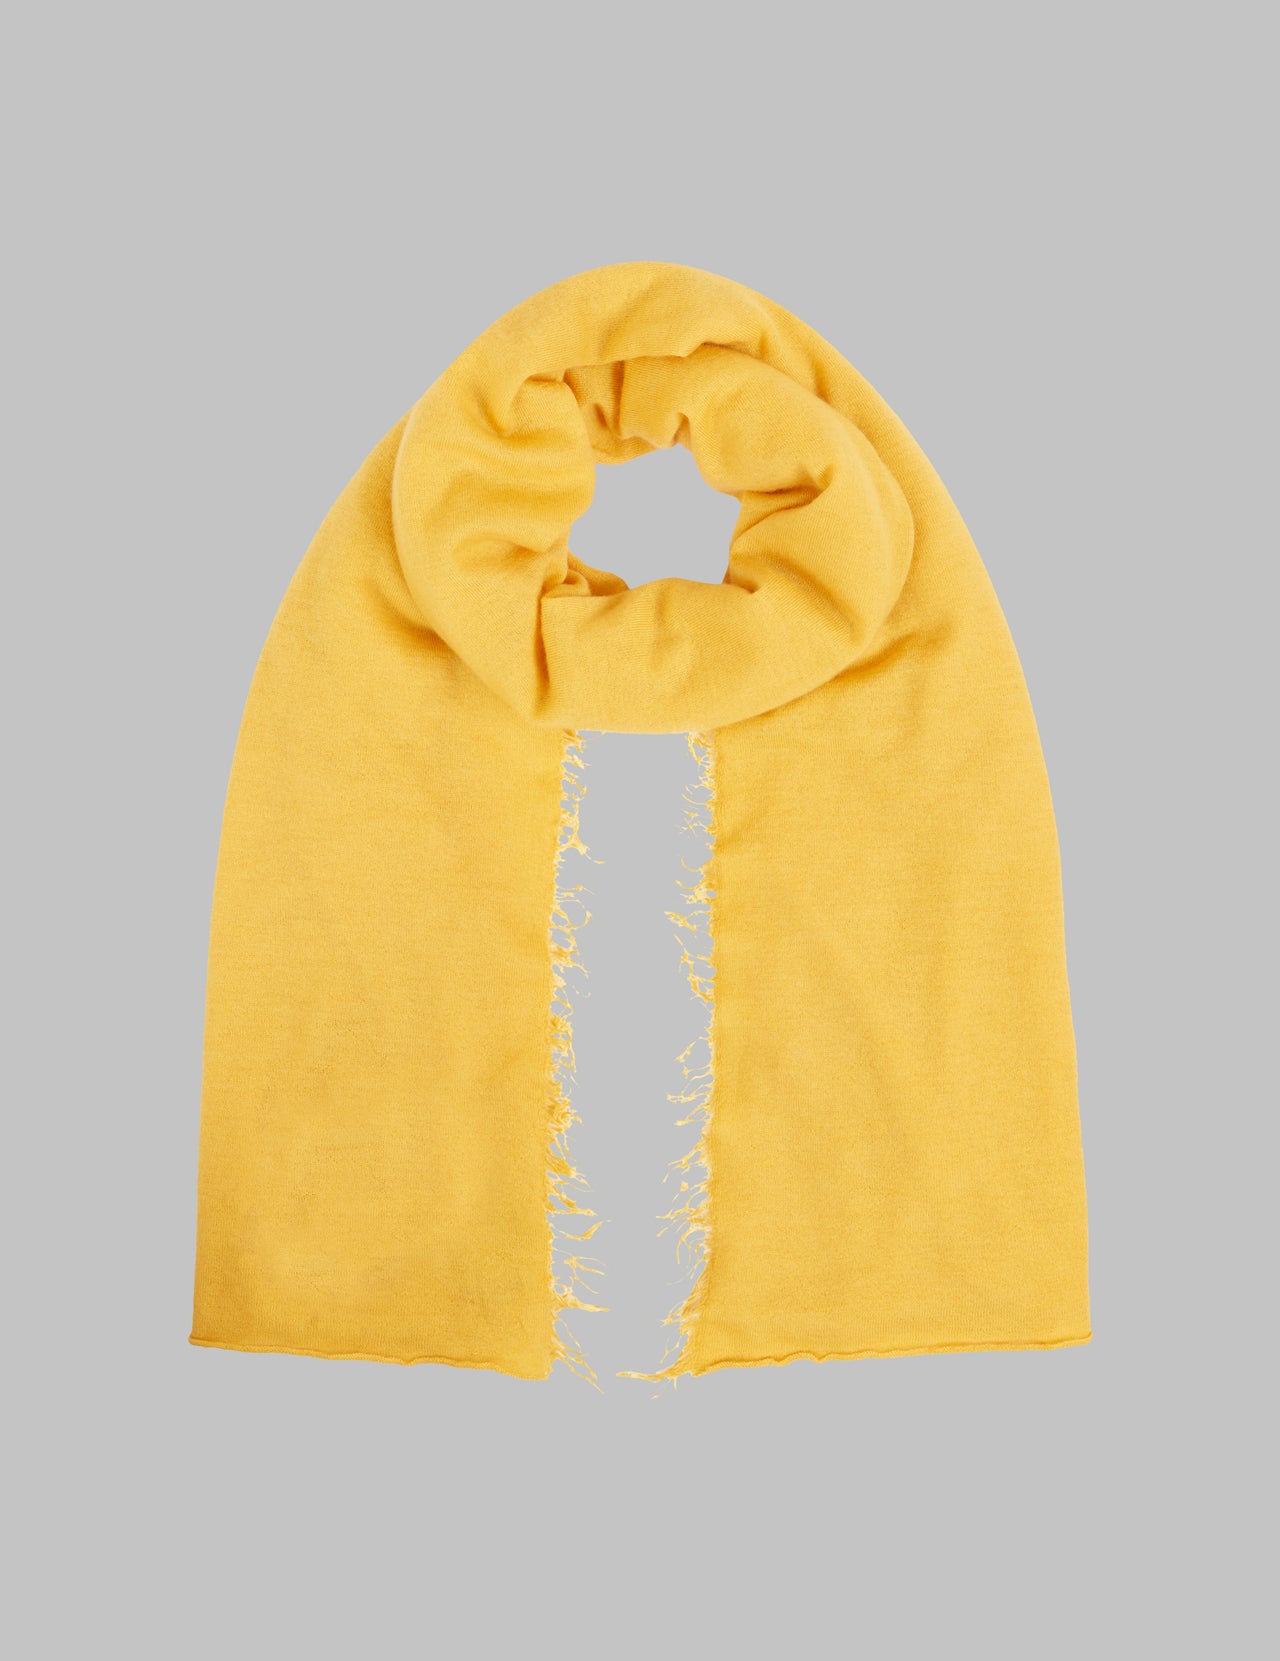  Yellow Handwoven Felted Cashmere Stole 